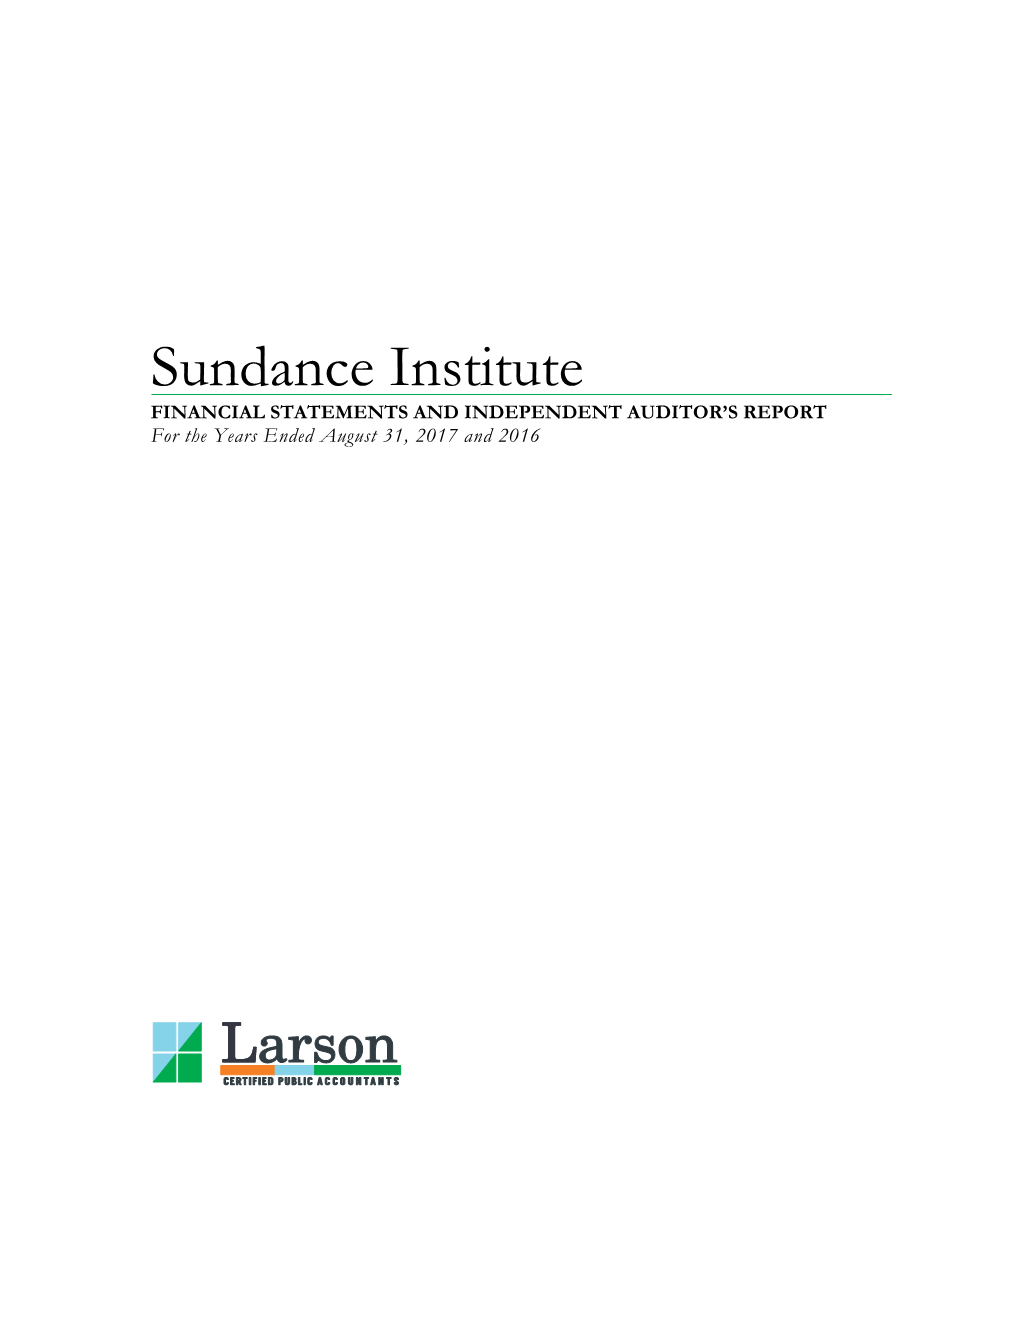 Audit Report and Financial Stmts Sundance Institute FY17.Pdf